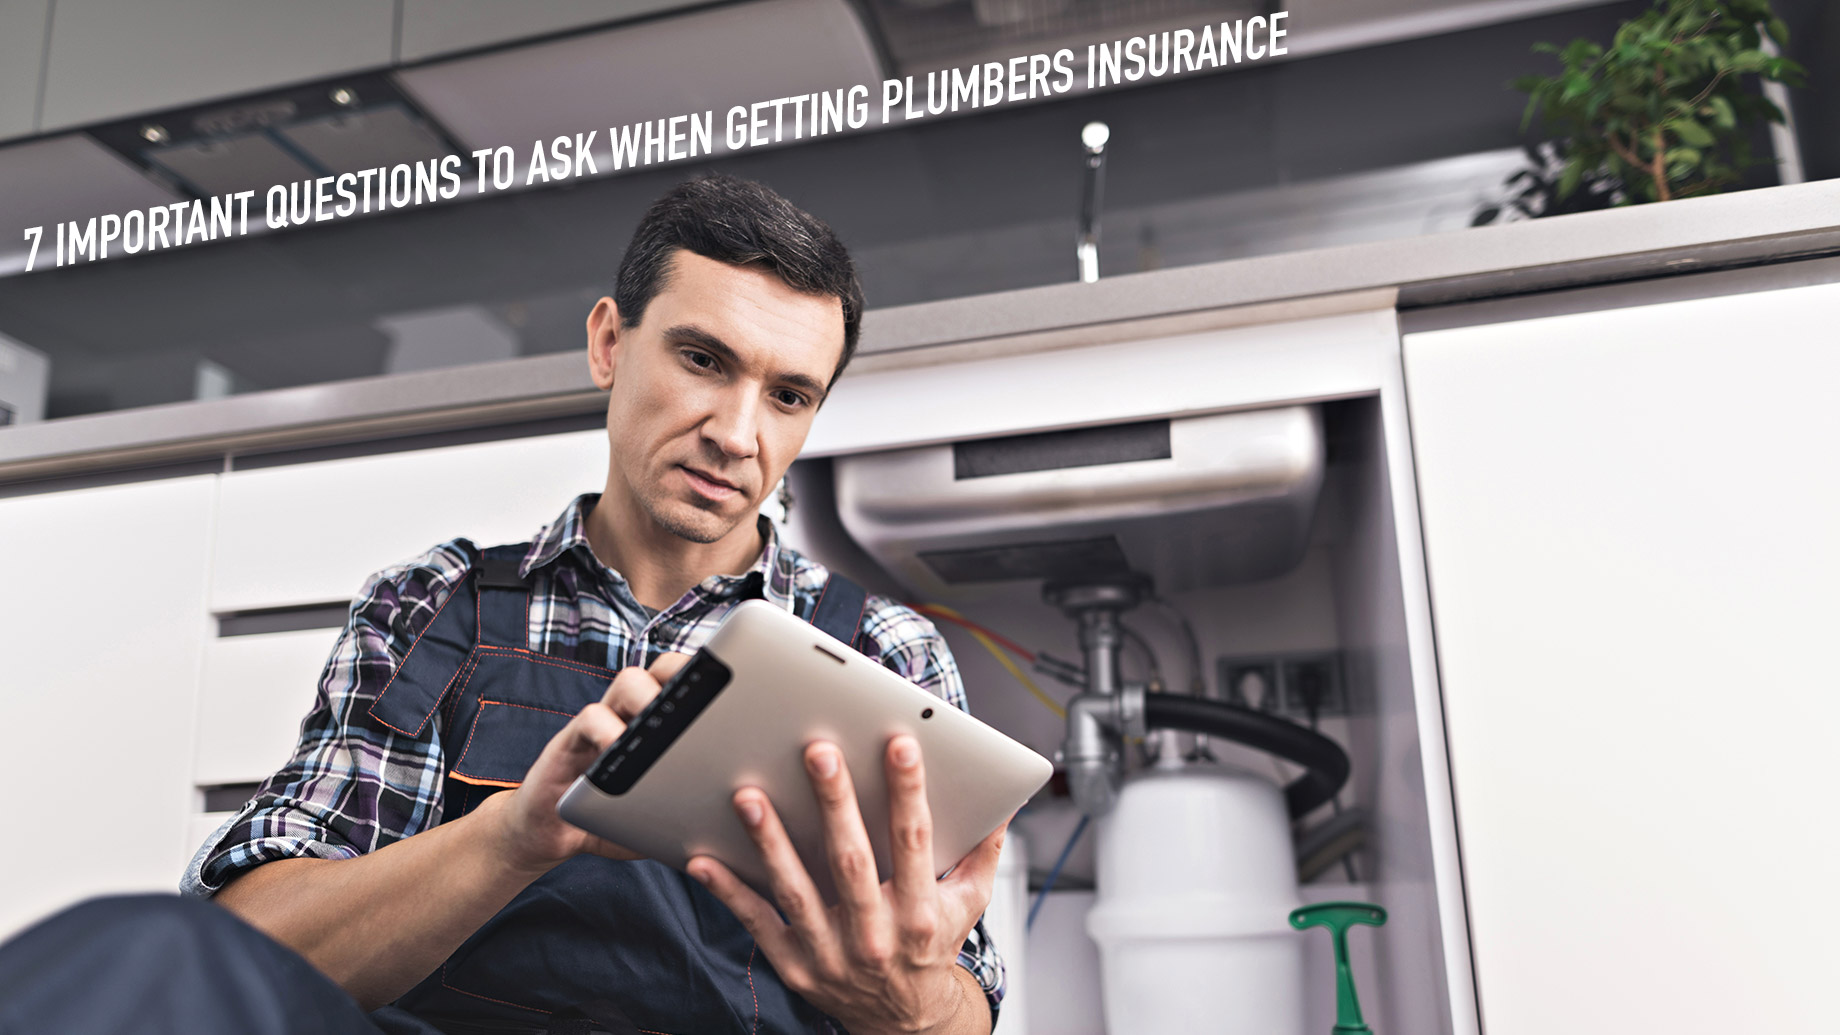 7 Important Questions to Ask When Getting Plumbers Insurance